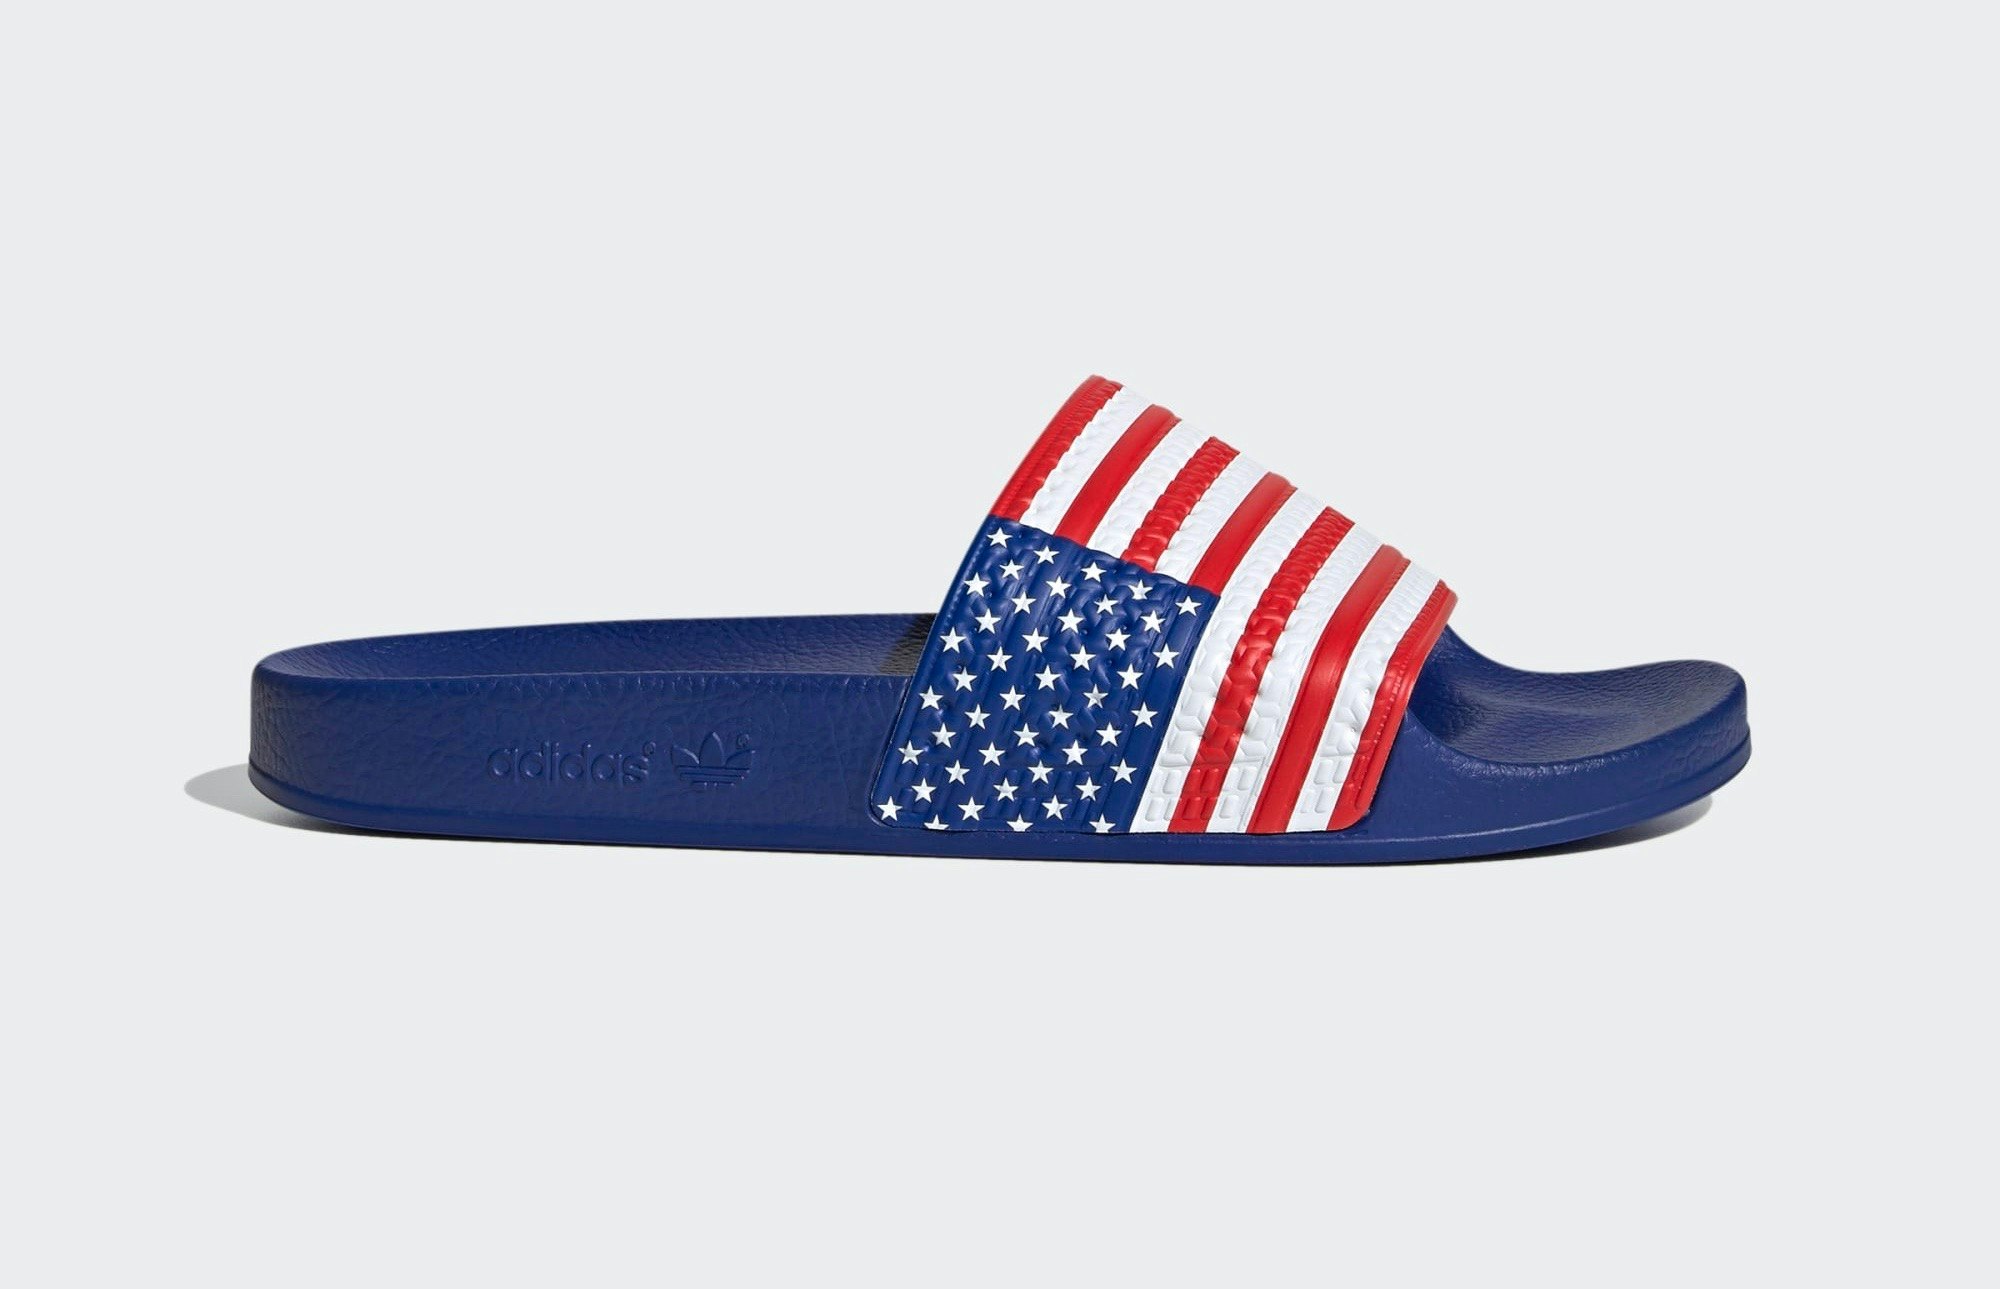 Adidas' 'USA' sandals are a perfect 